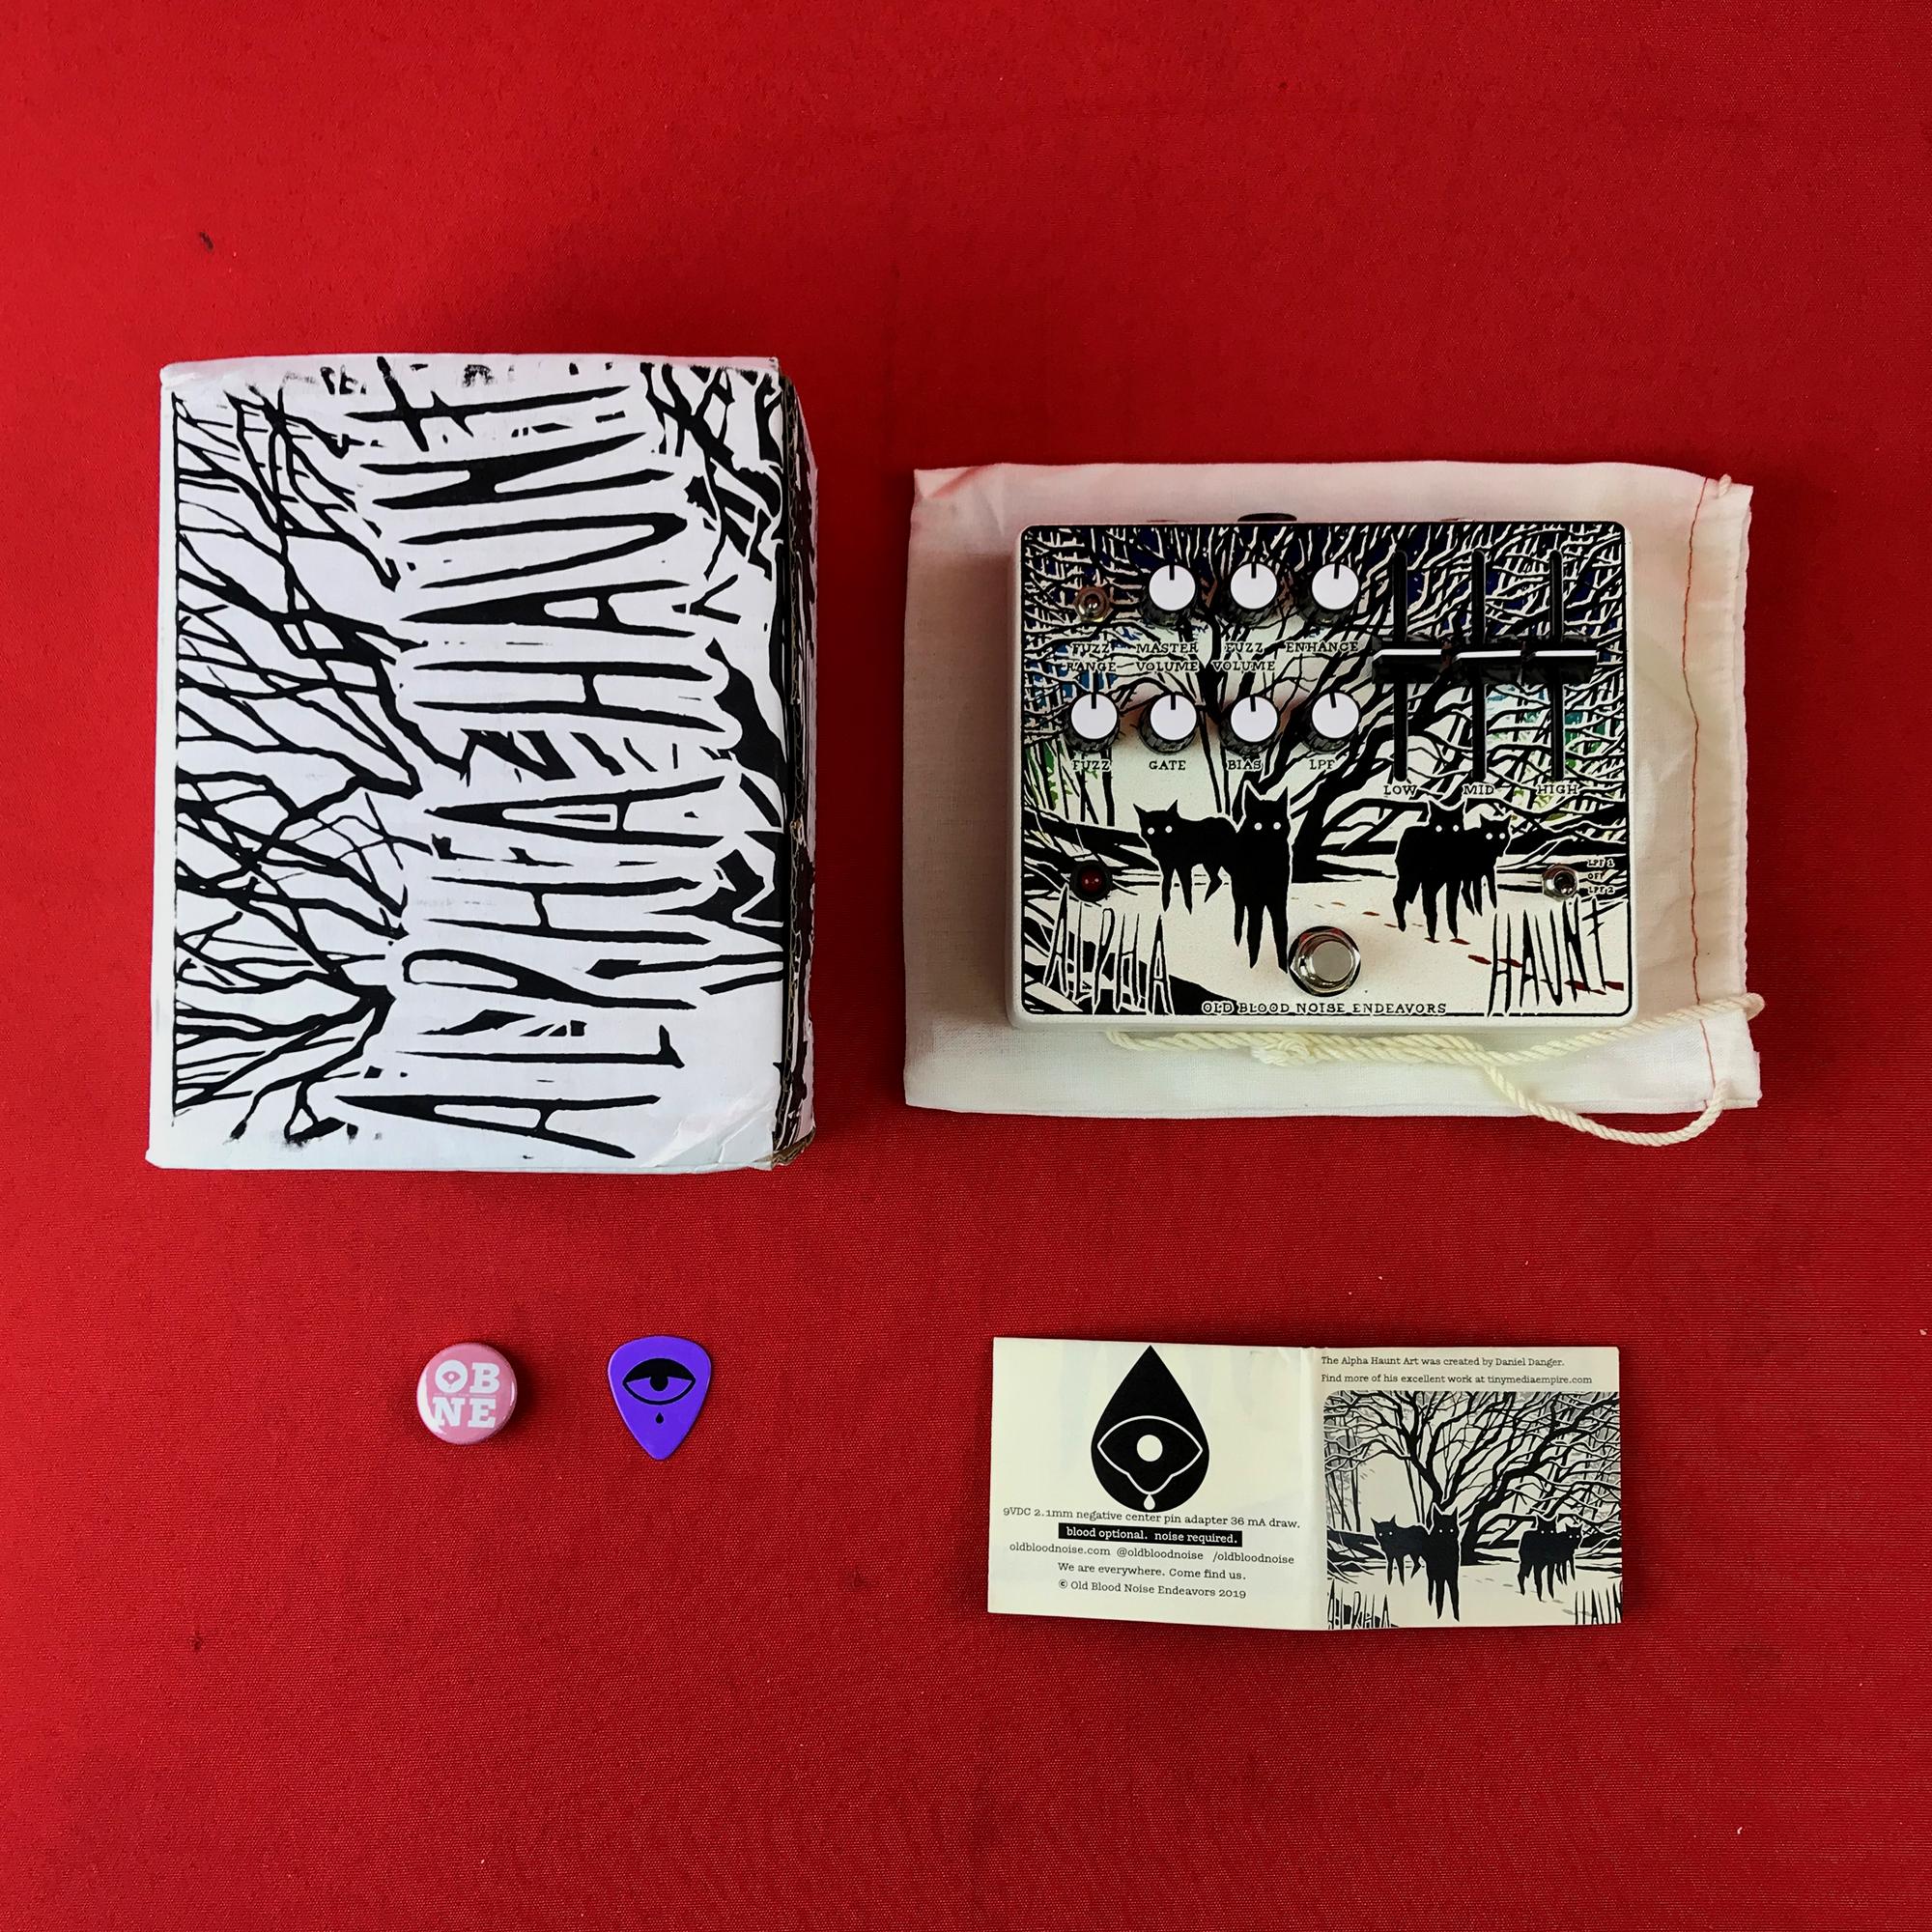 [USED] Old Blood Noise Endeavors Alpha Haunt Fuzz